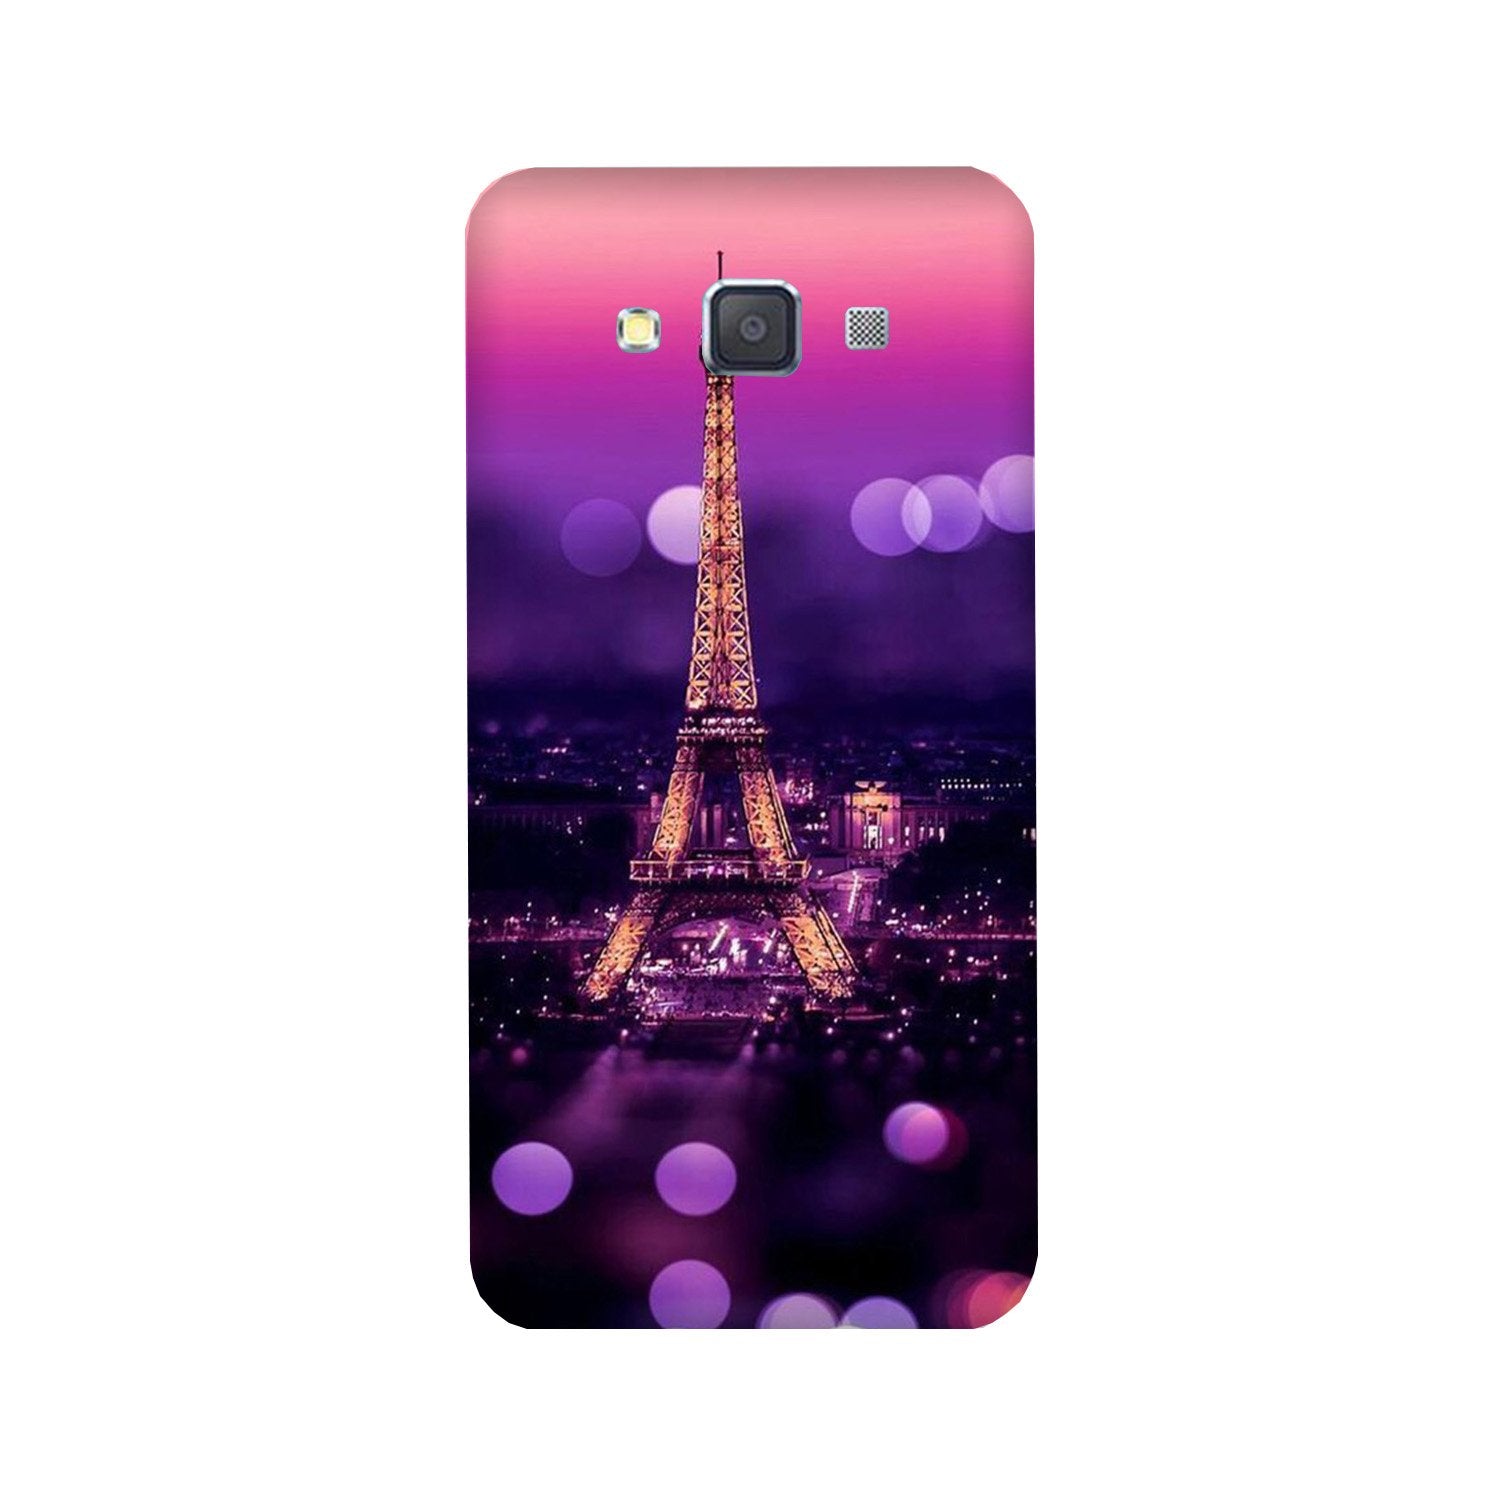 Eiffel Tower Case for Galaxy Grand Prime